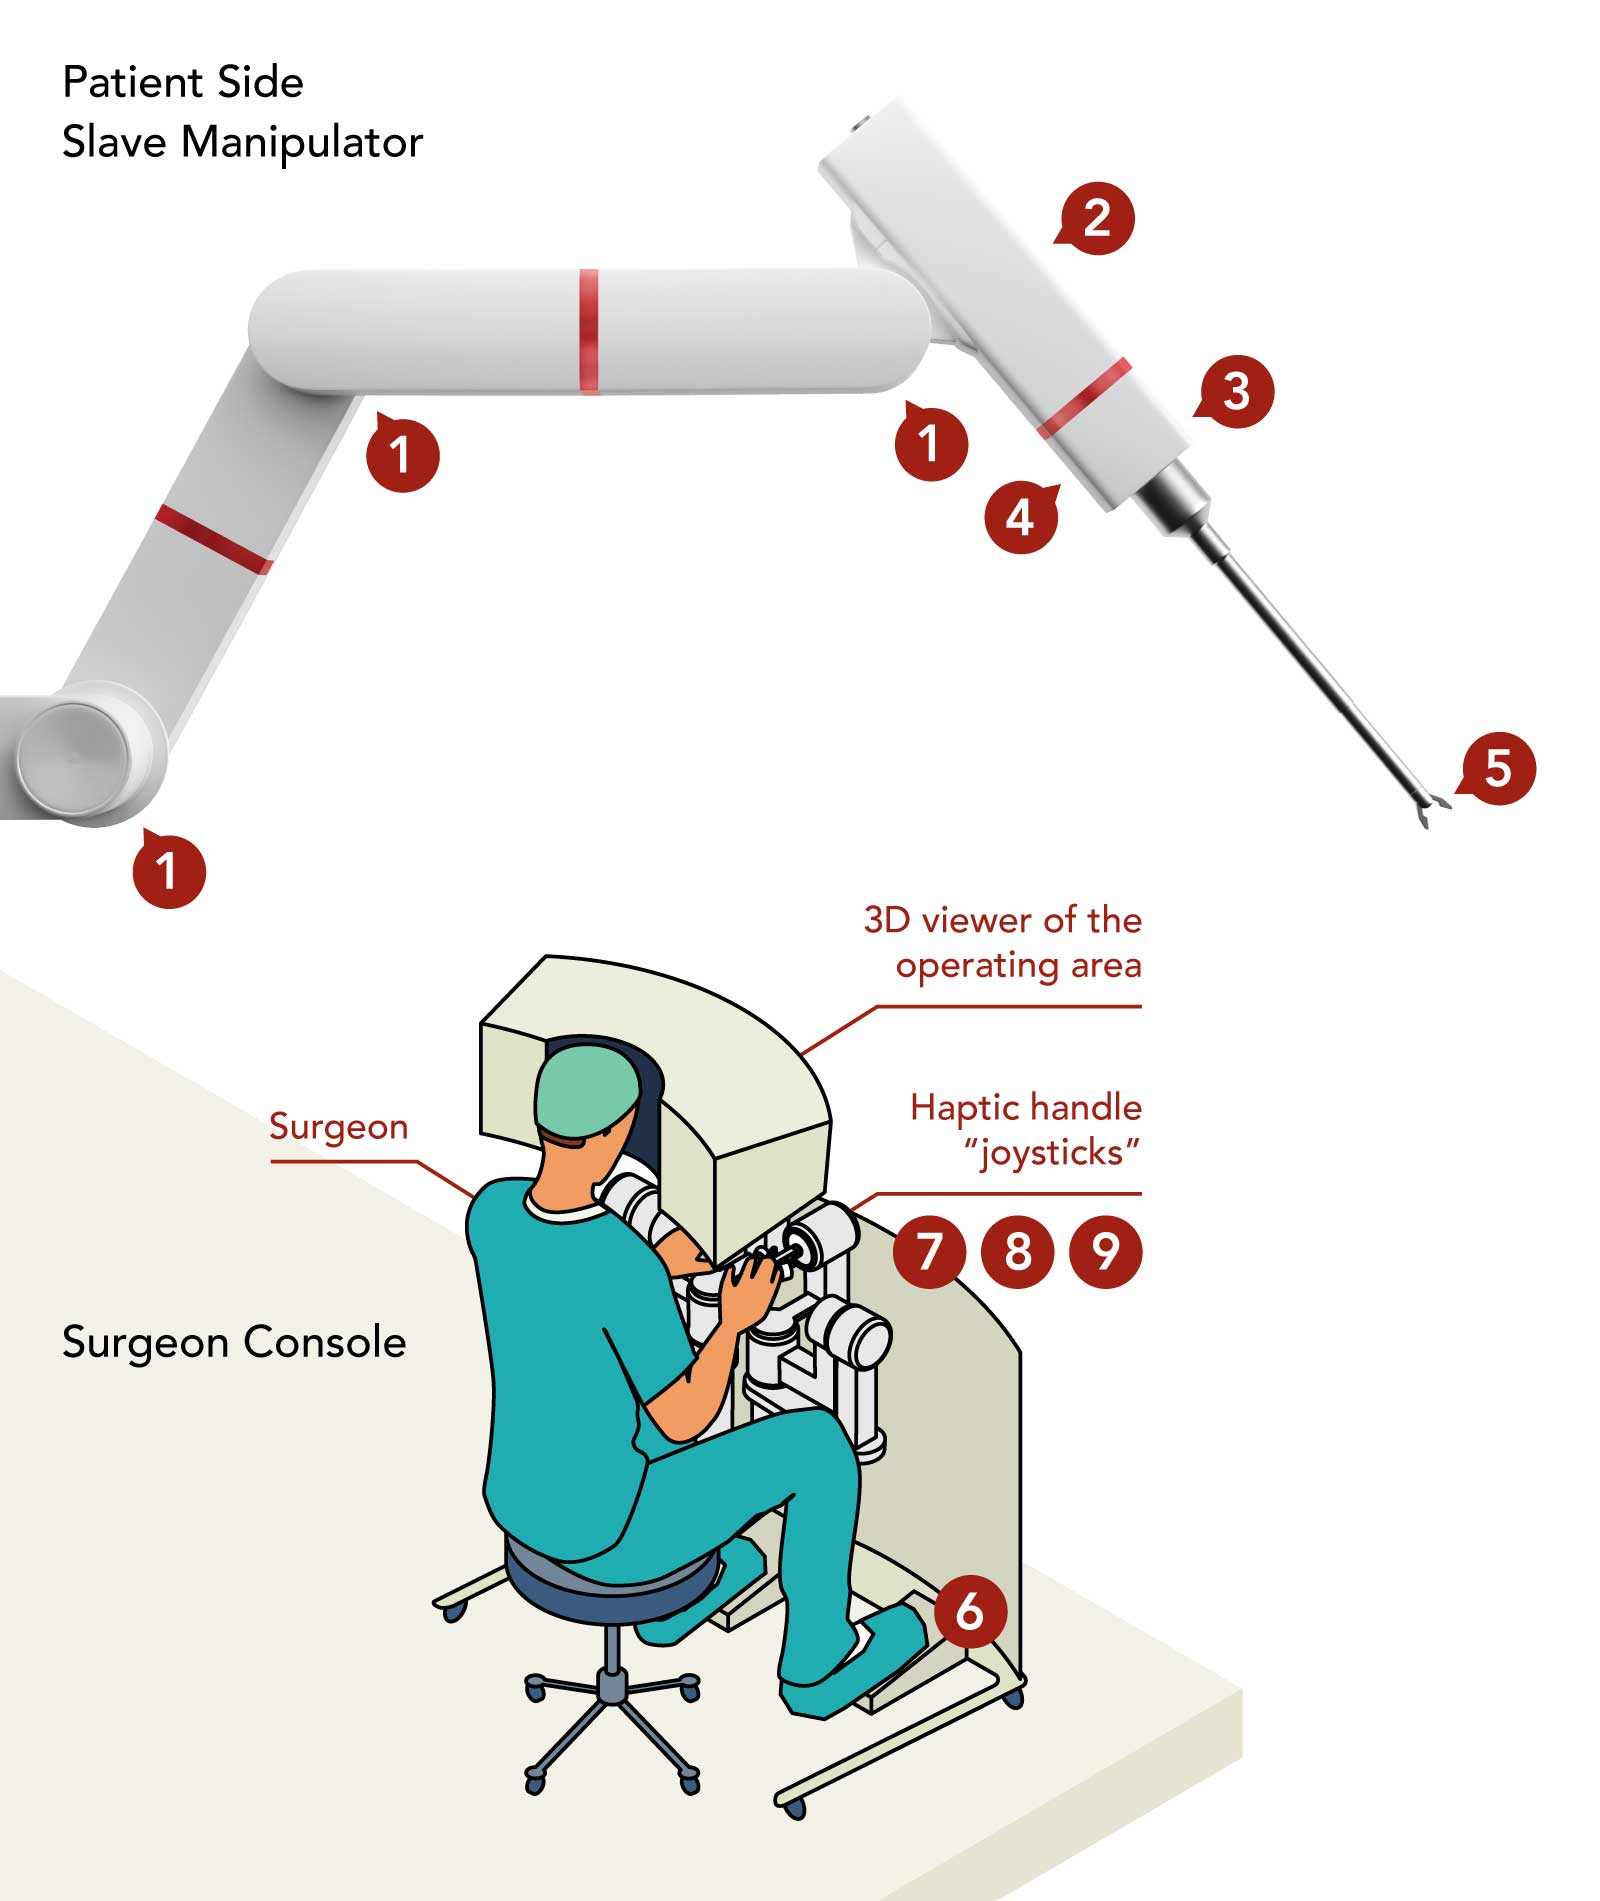 A diagram consisting of a patient-side manipulator arm labeled with items 1 through 5, and a surgeon console labeled with items 6 through 9